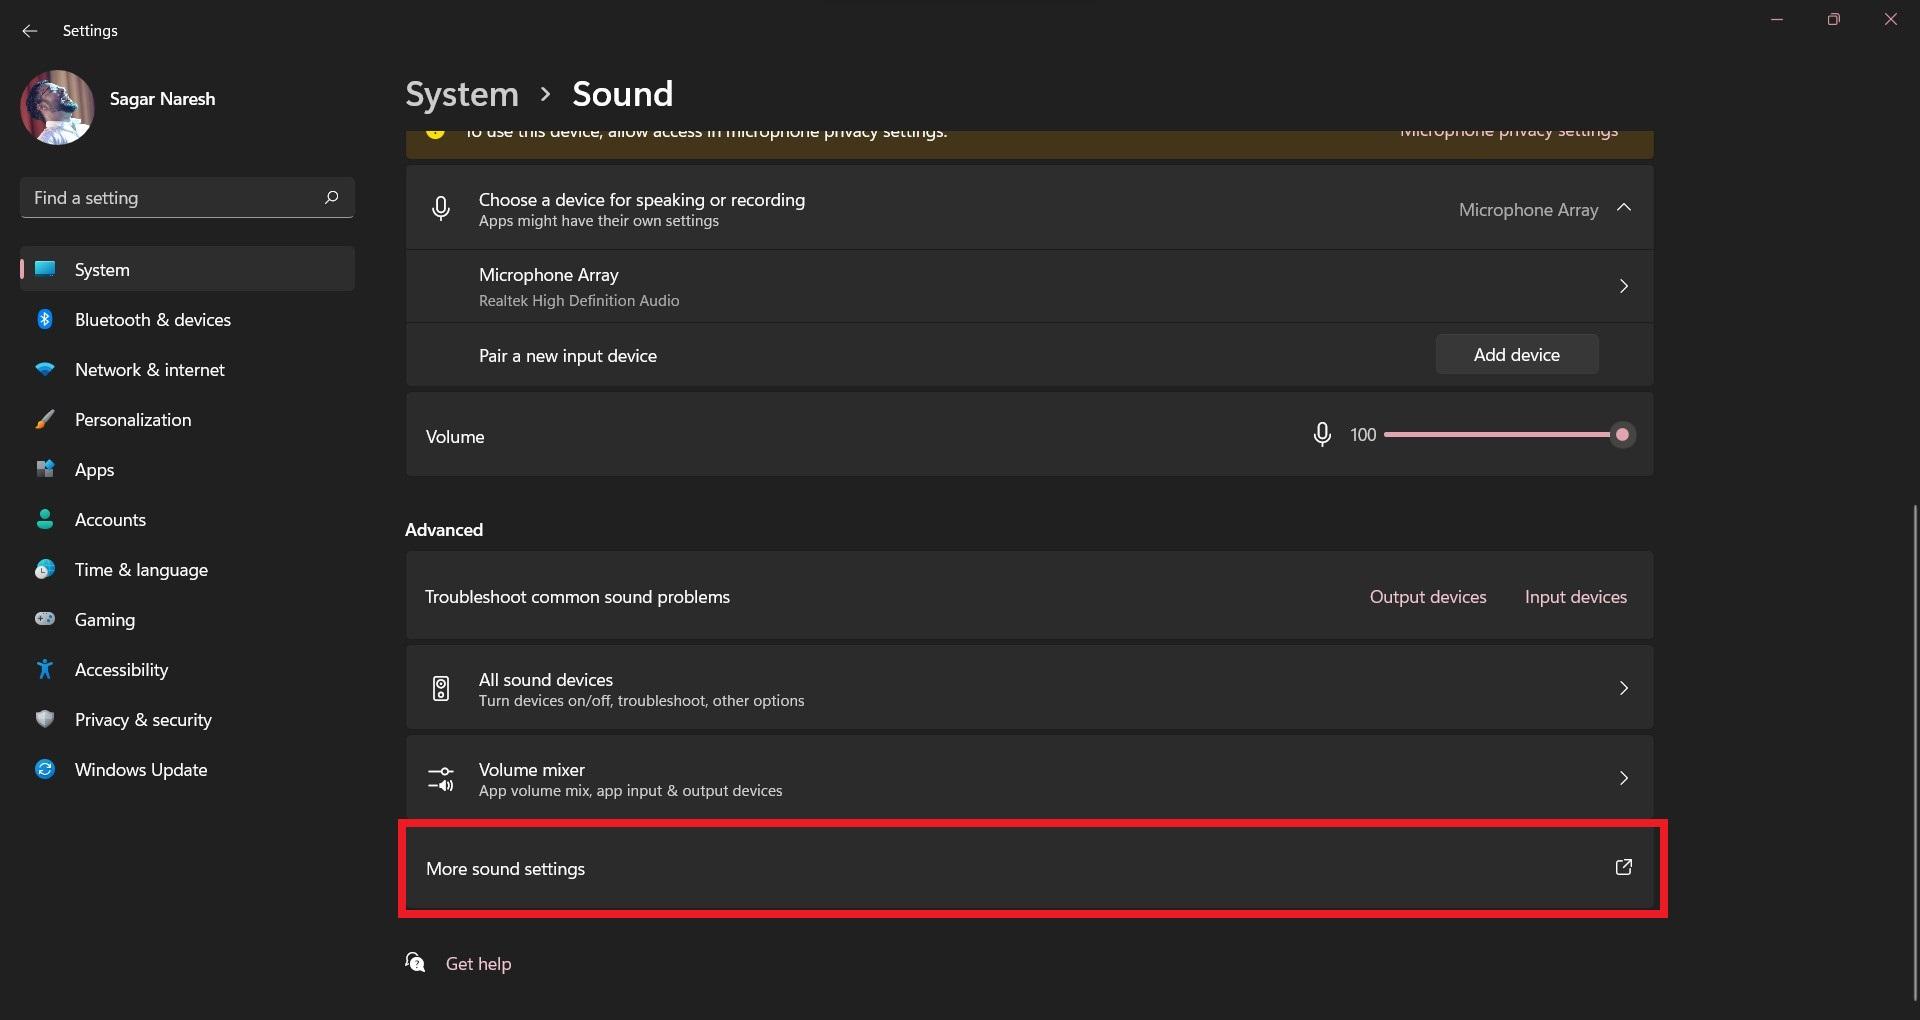 More Sound Settings